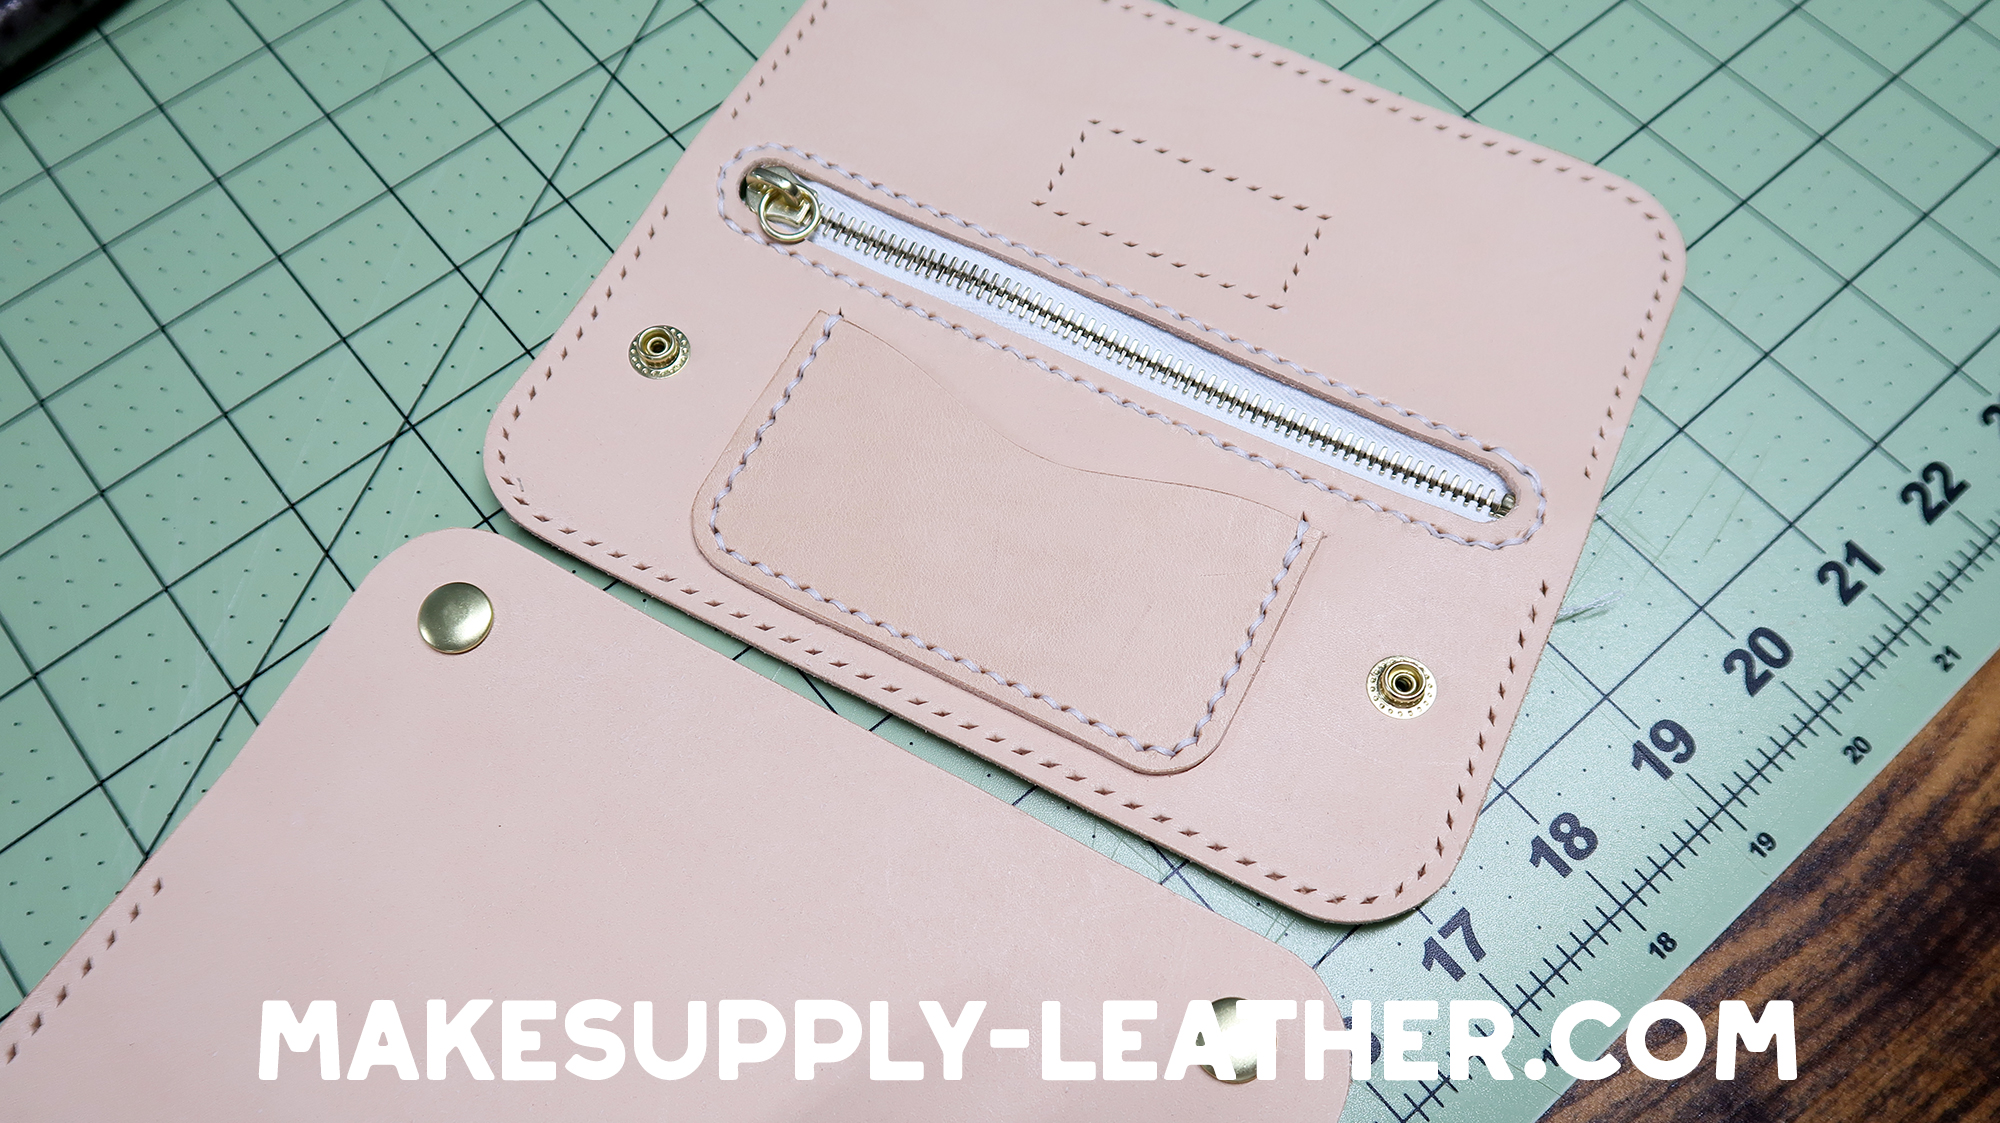 MAKESUPPLY - Free Leather Patterns, Leather Templates and Information